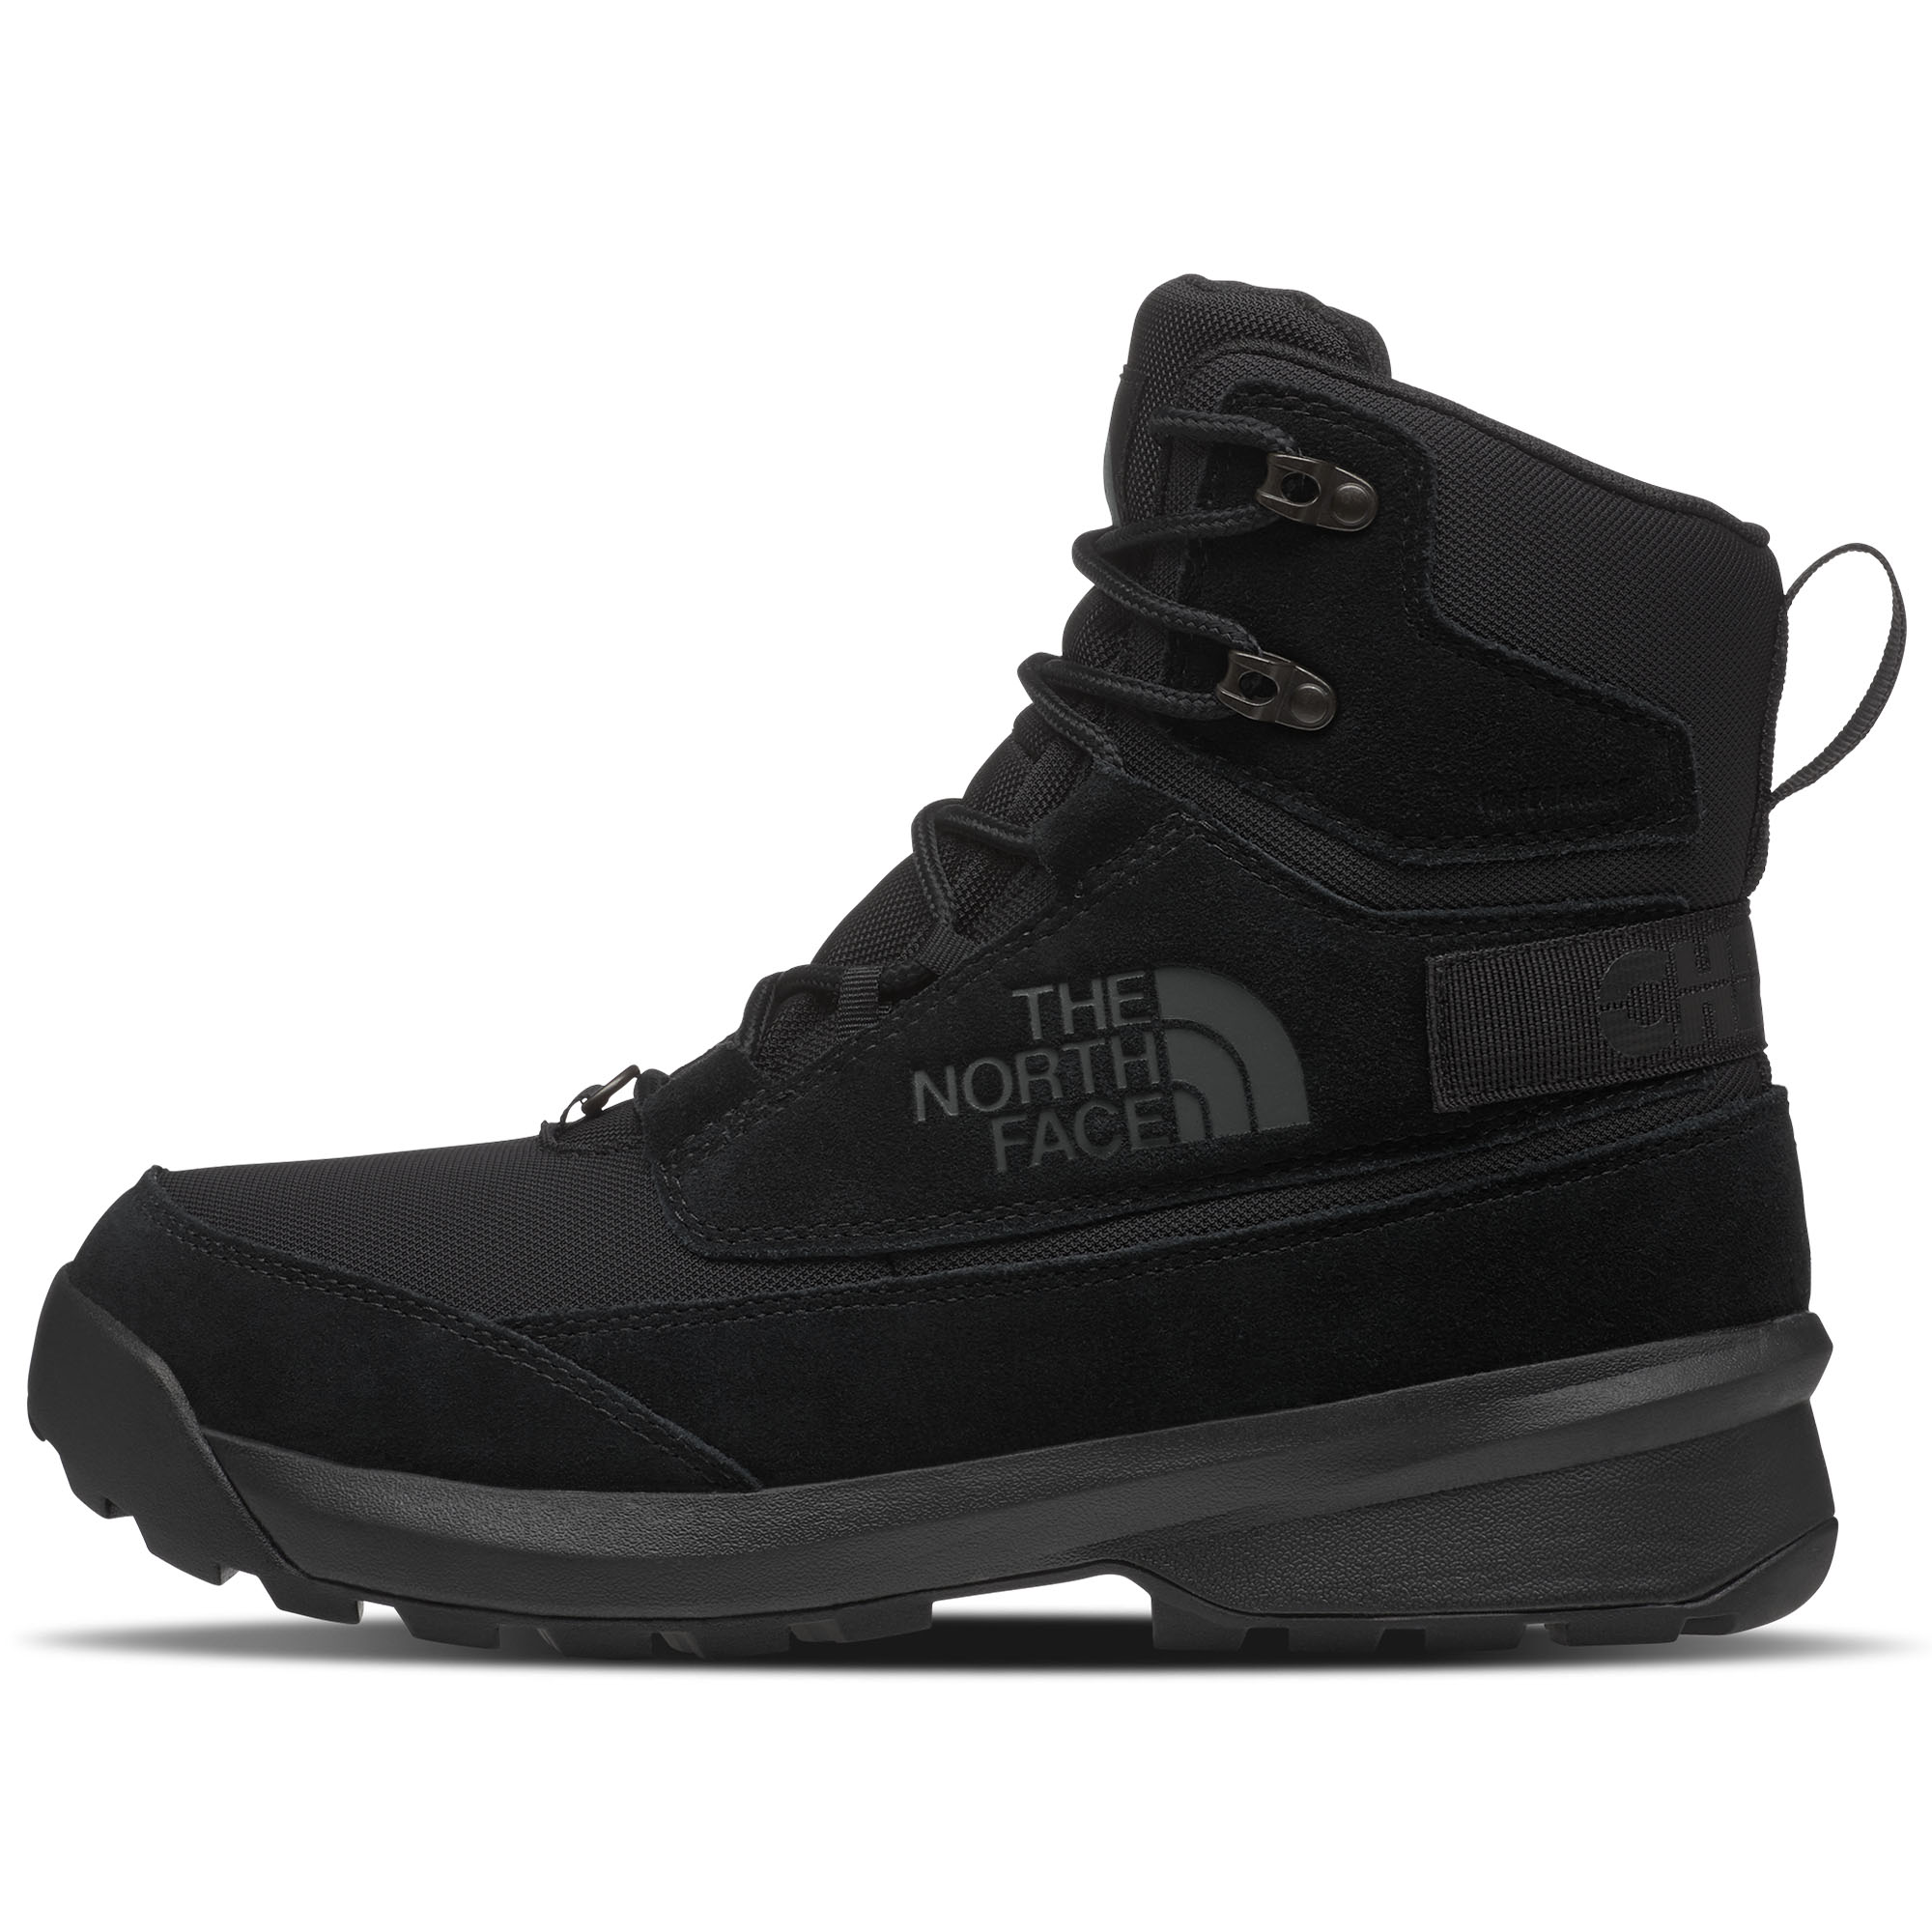 The North Face Men's Chilkat V Cognito Waterproof Boots -  00196247375015